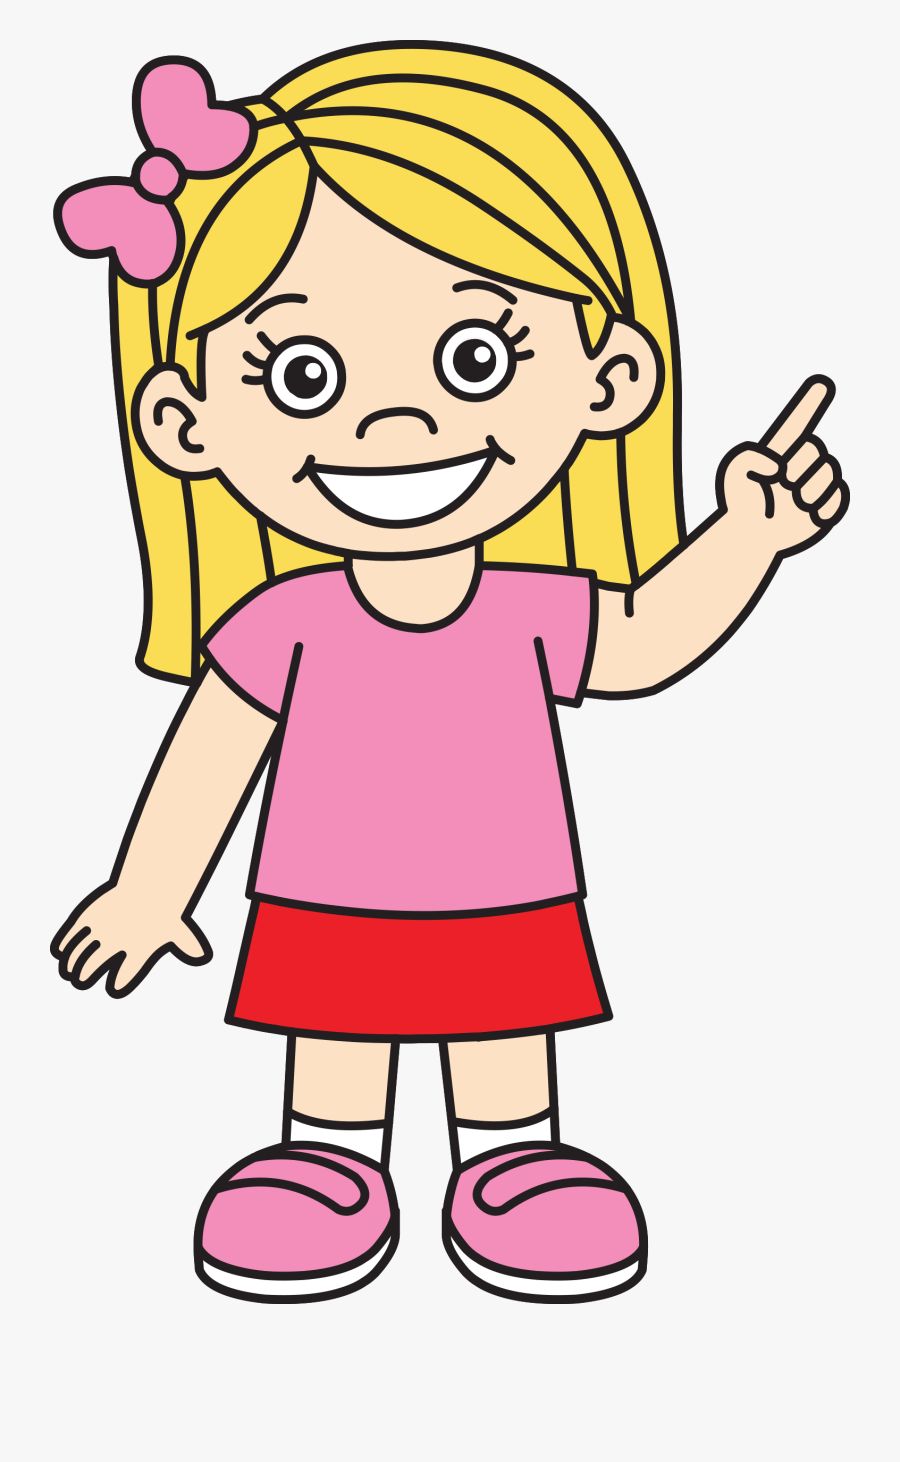 Big Pinterest - Girl Pointing Finger Clipart , Free Transparent Clipart